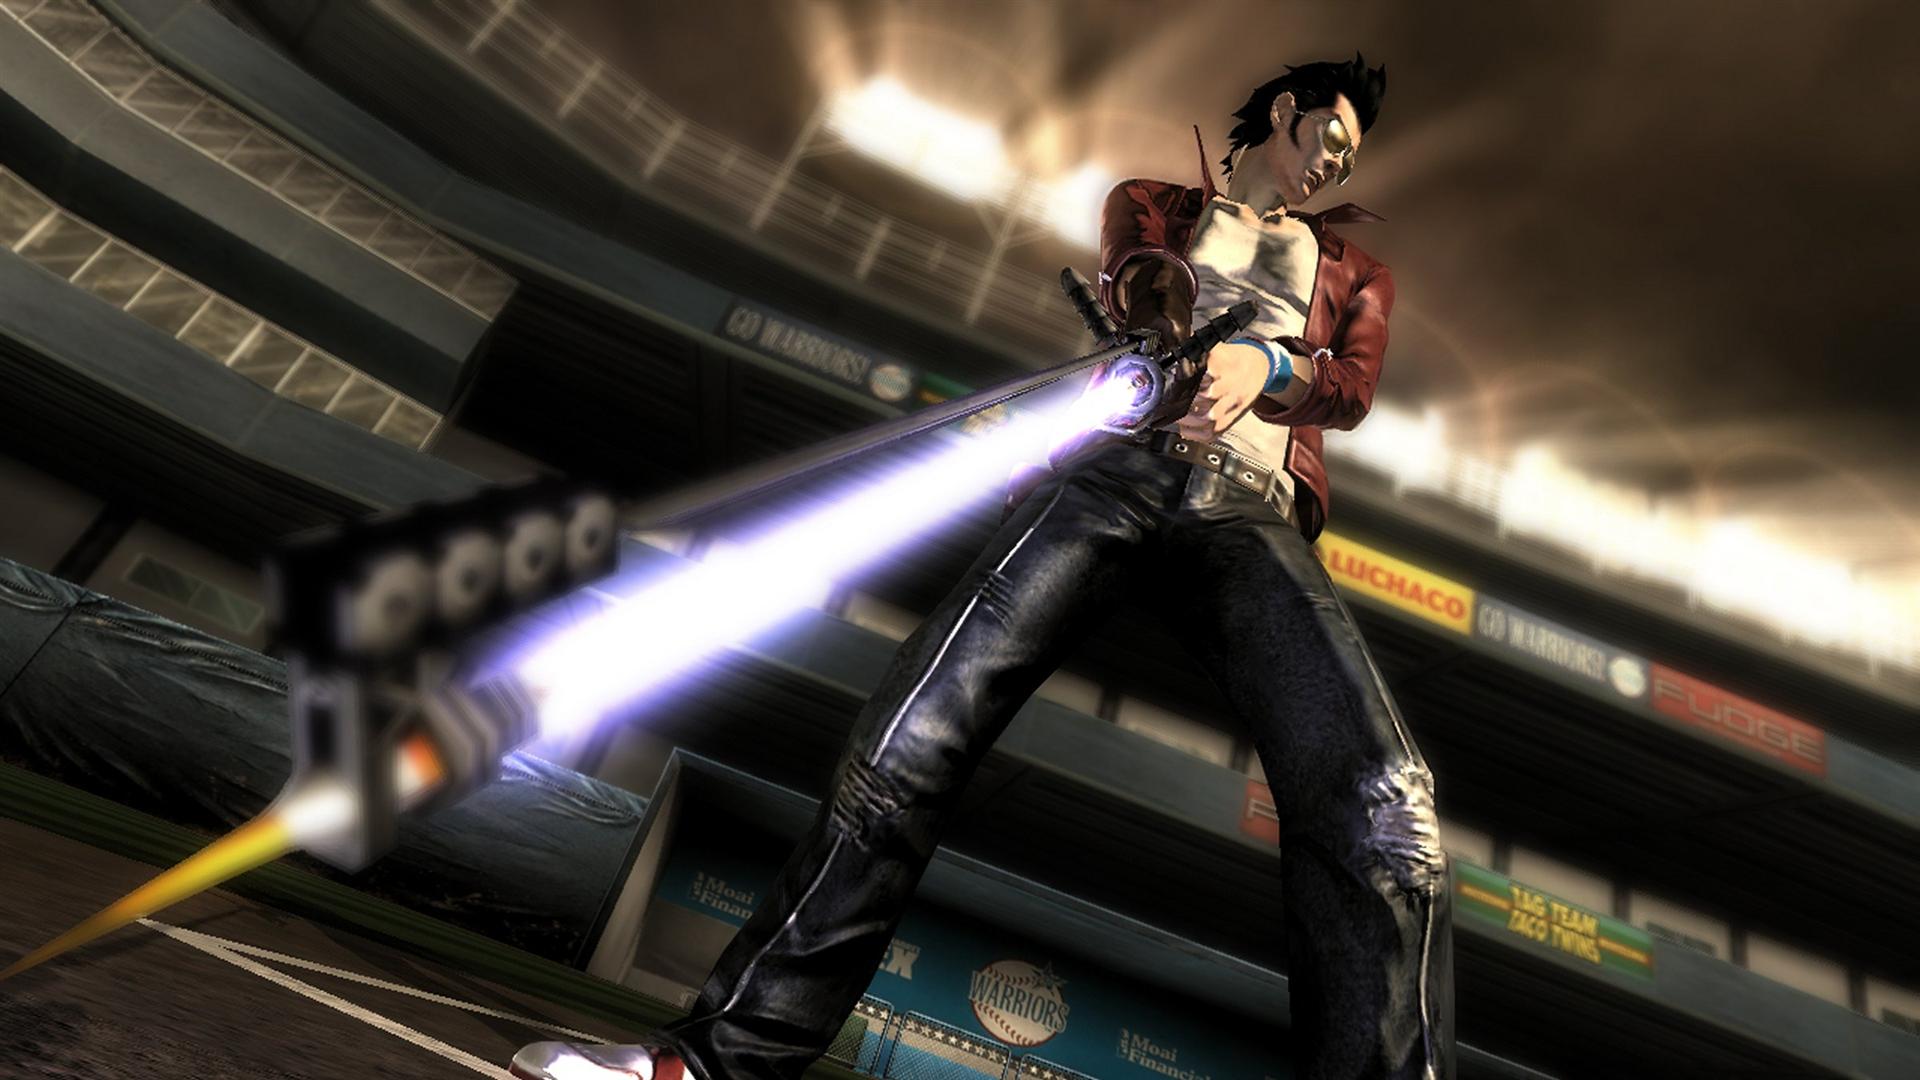 One game or many. No more Heroes (игра). No more Heroes 3. No more Heroes: Heroes' Paradise. No more Heroes 1.